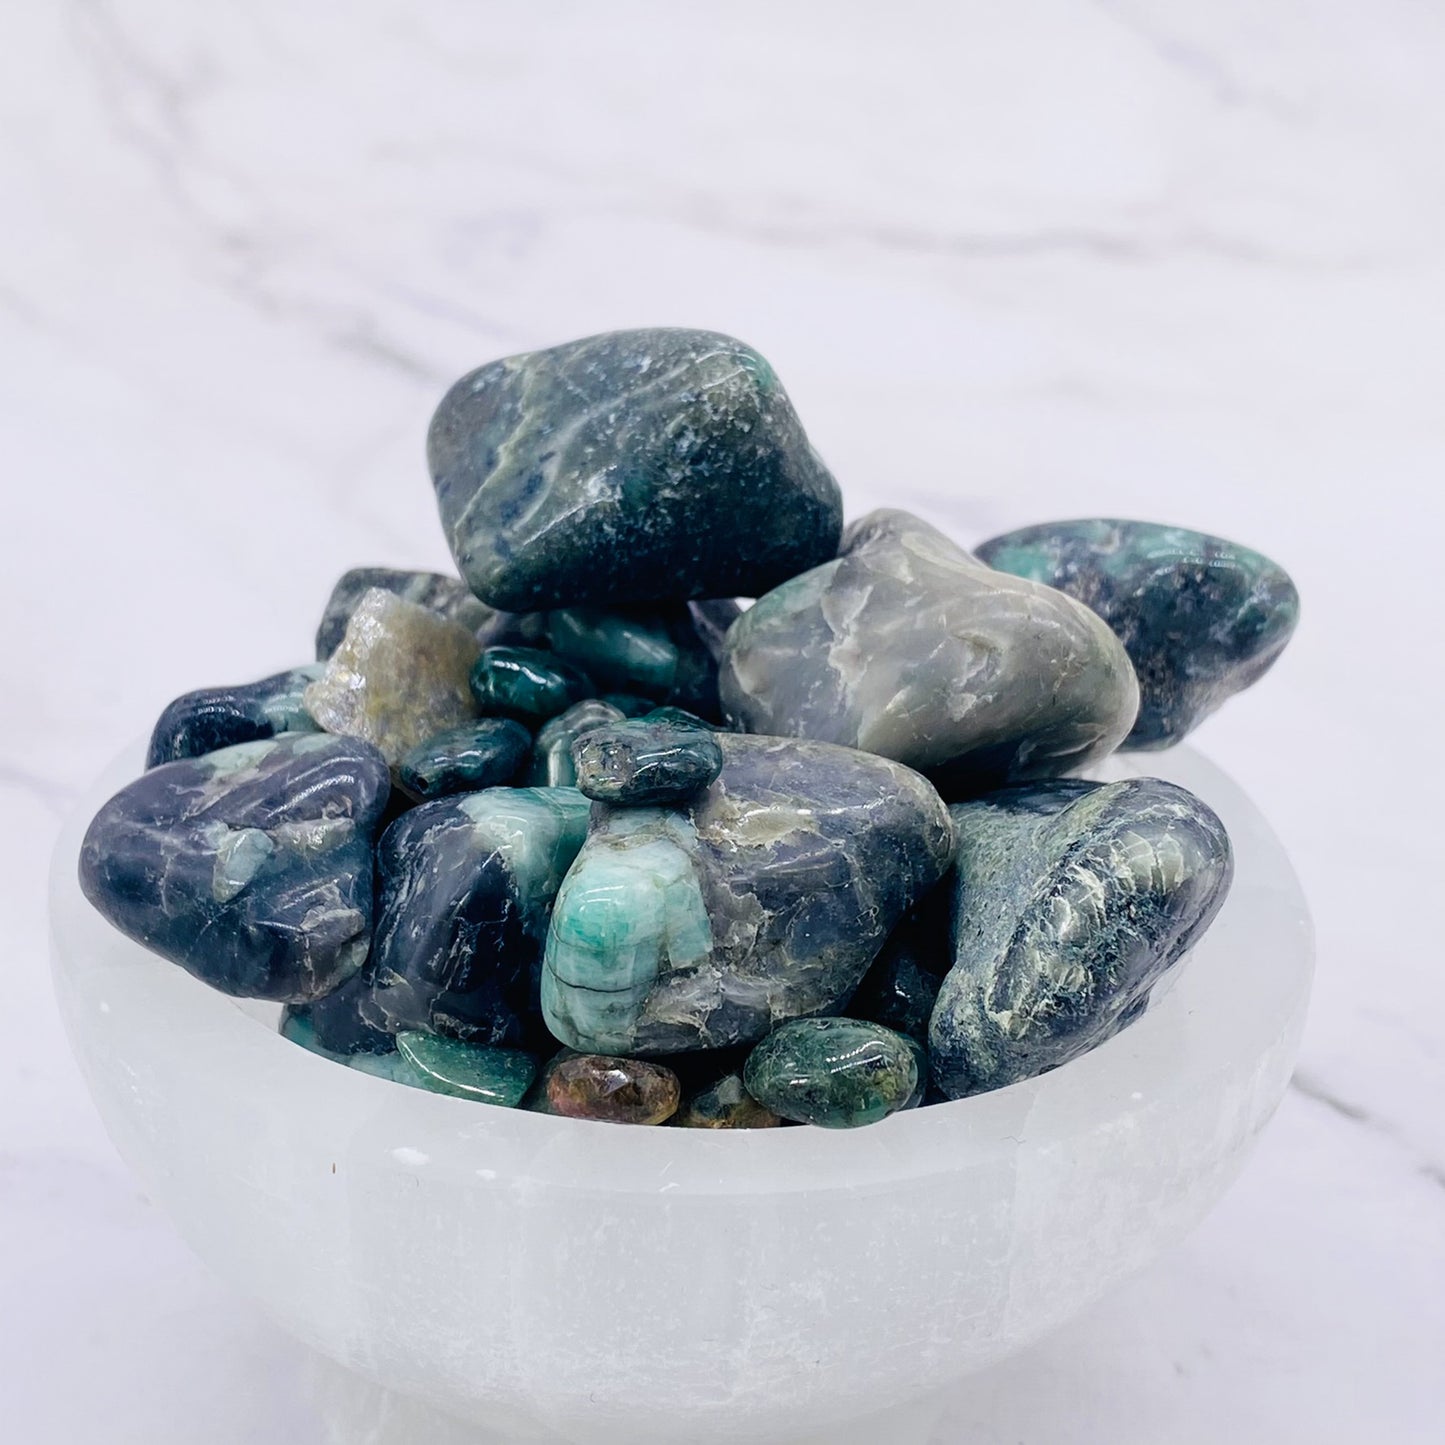 Emerald Tumble stone, Polished Emerald, Healing Crystal, Pocket Stone, Genuine Emerald, Crystal for Love and Cleansing, Stone of Love